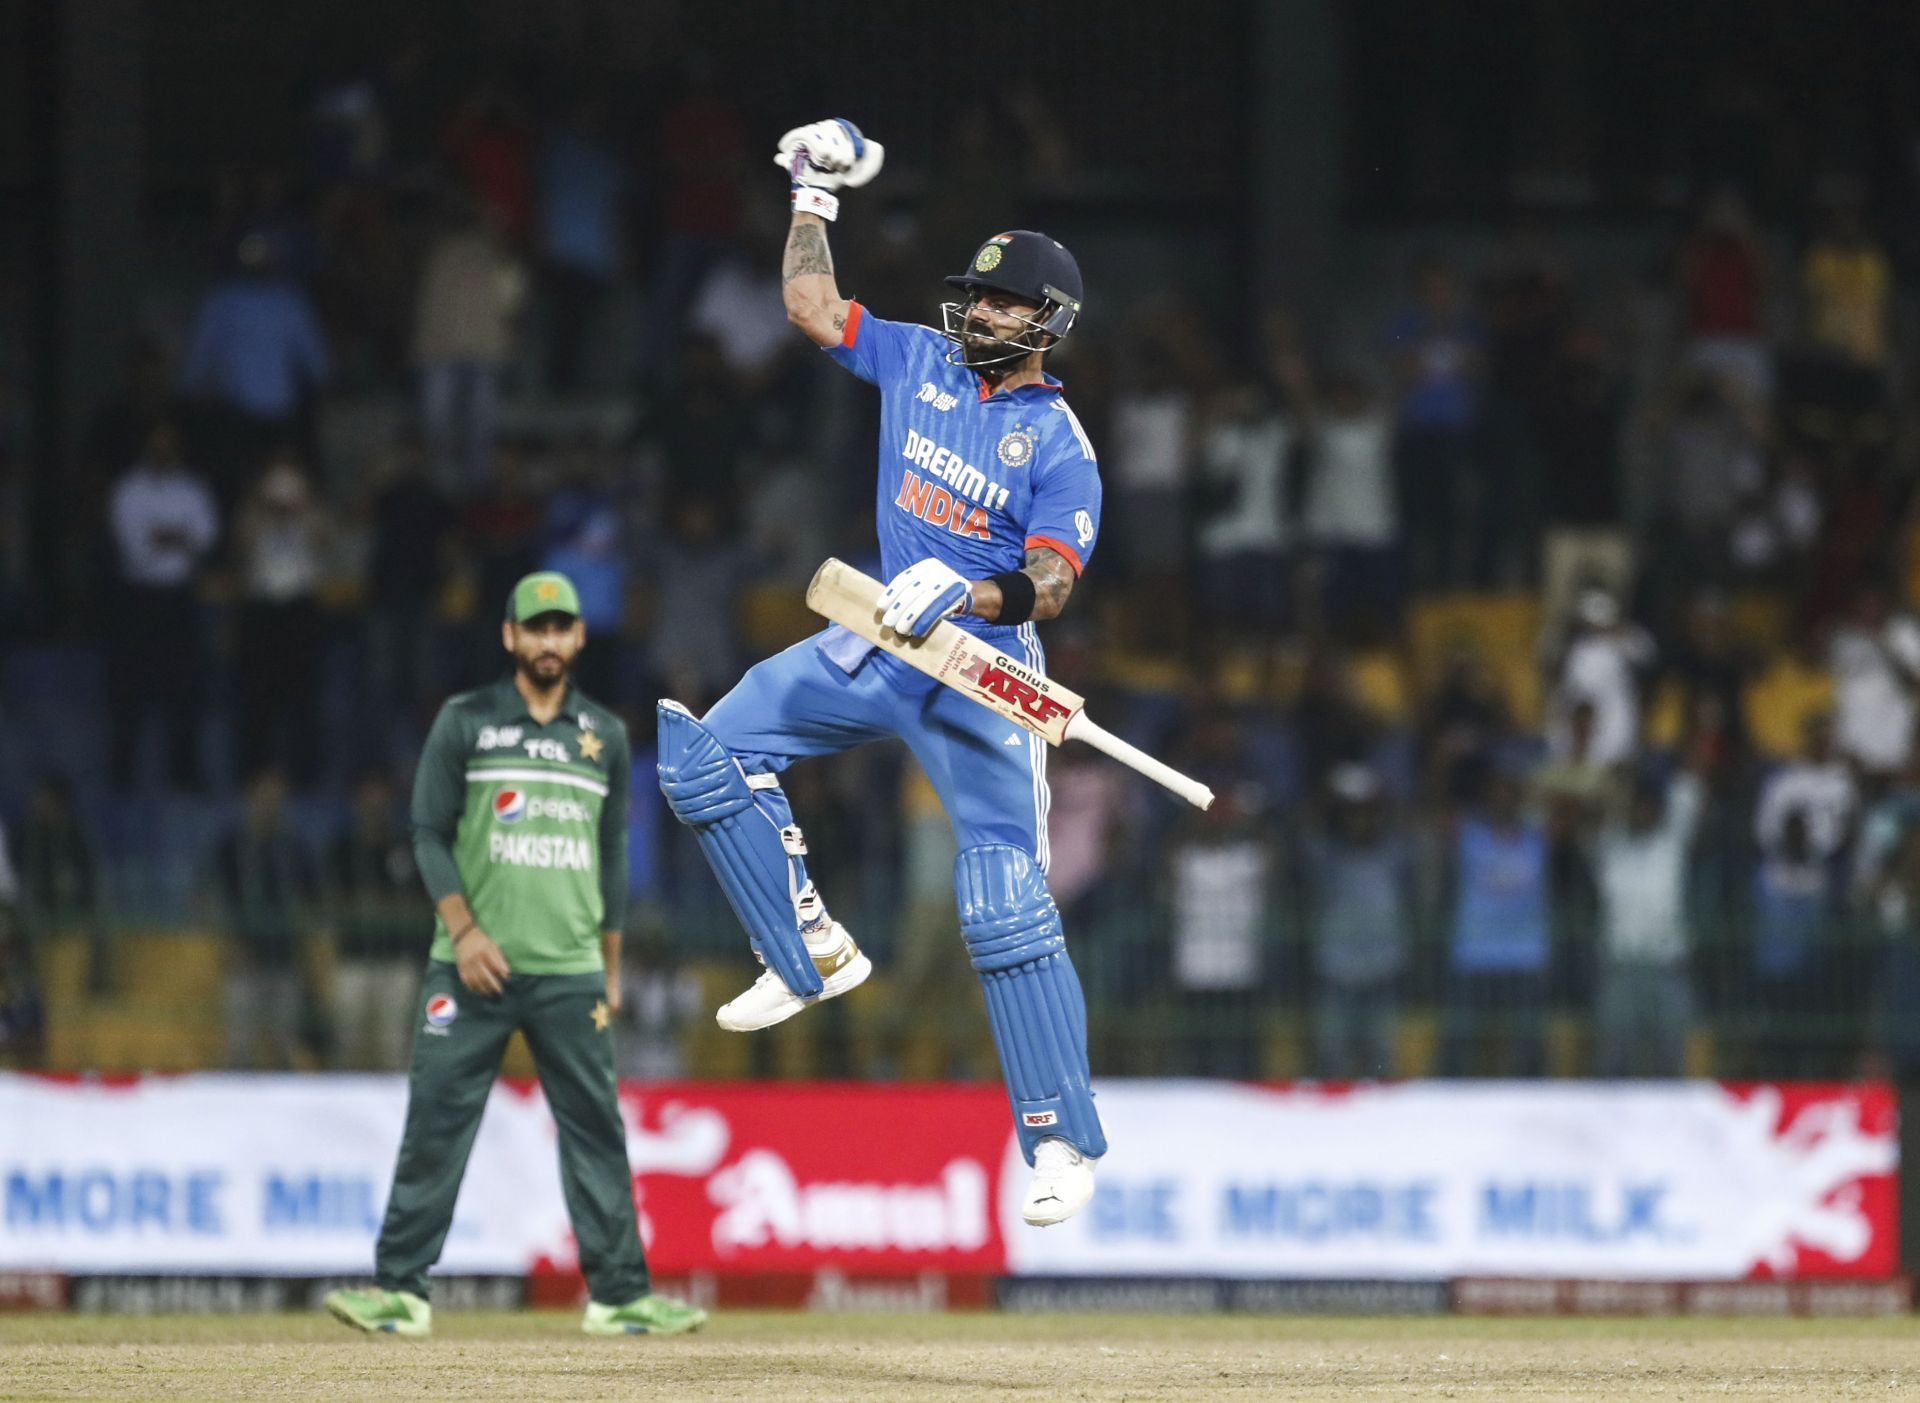 Virat Kohli brought up his 47th ODI ton playing in his 278 matches in the ODI format. He is now only two shy of equaling Sachin Tendulkar&rsquo;s record of 49 ODI hundreds. (Pic: AP Photo)